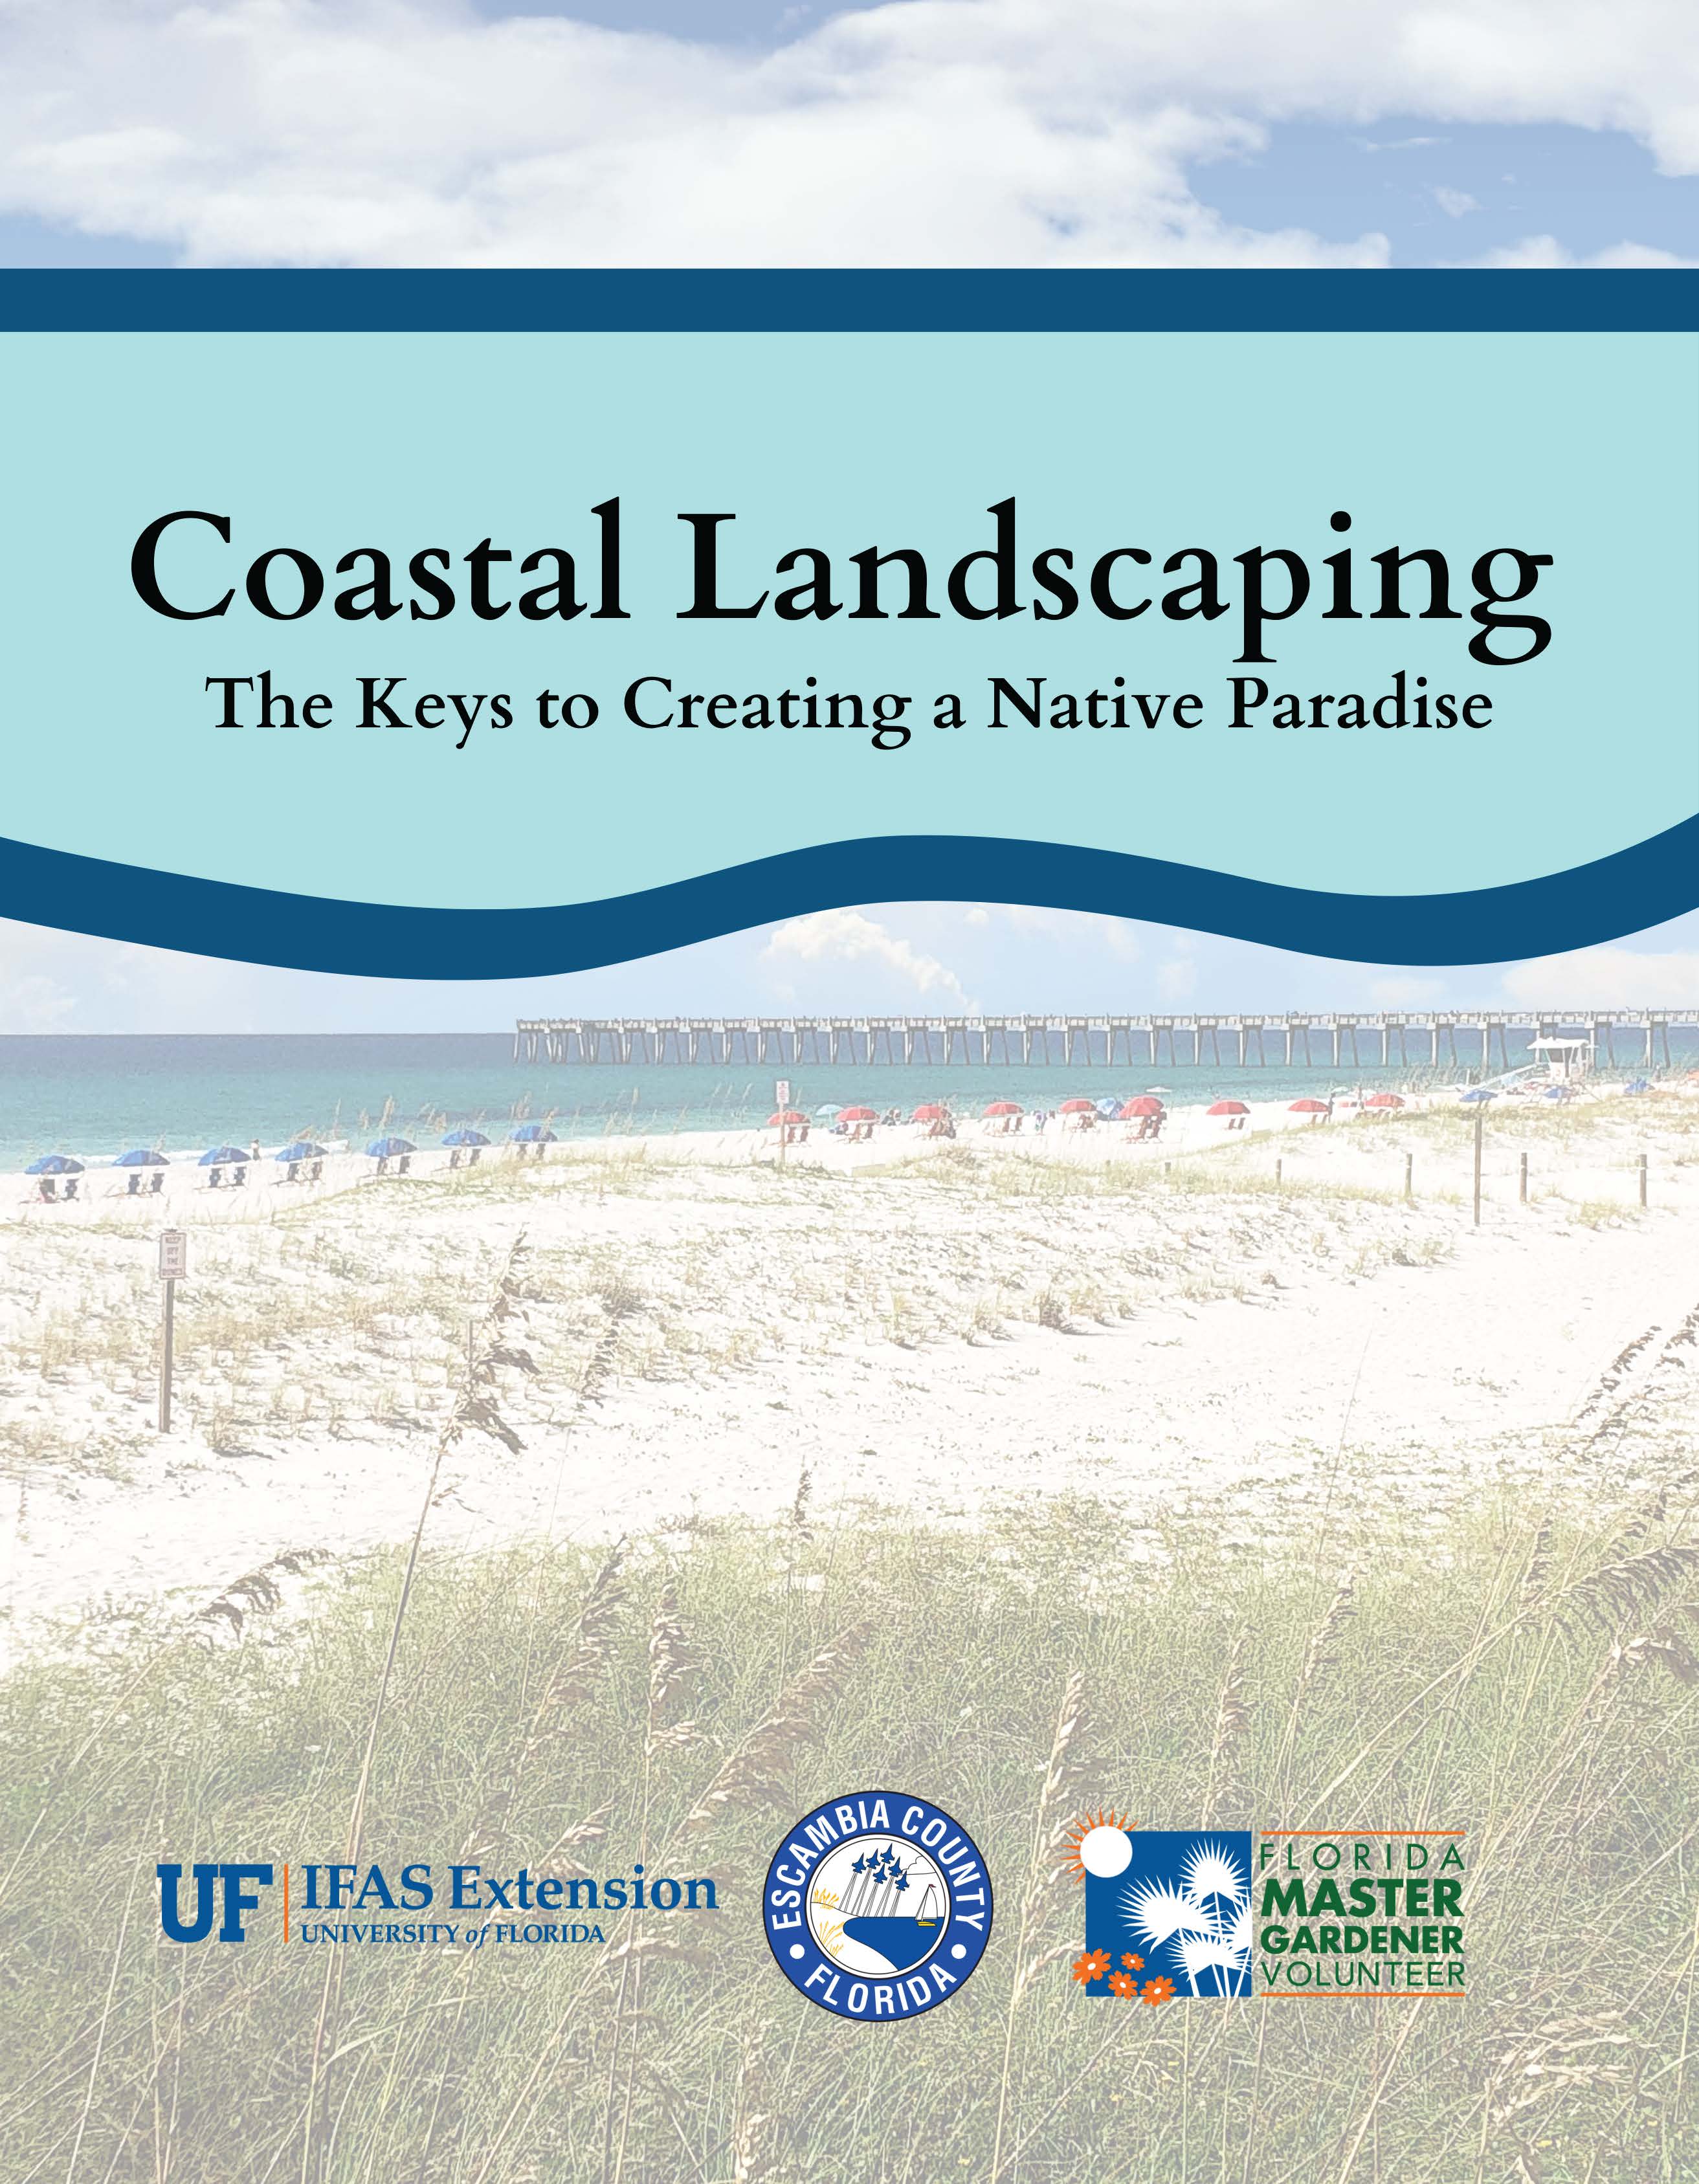 Cover to coastal landscaping brochure 